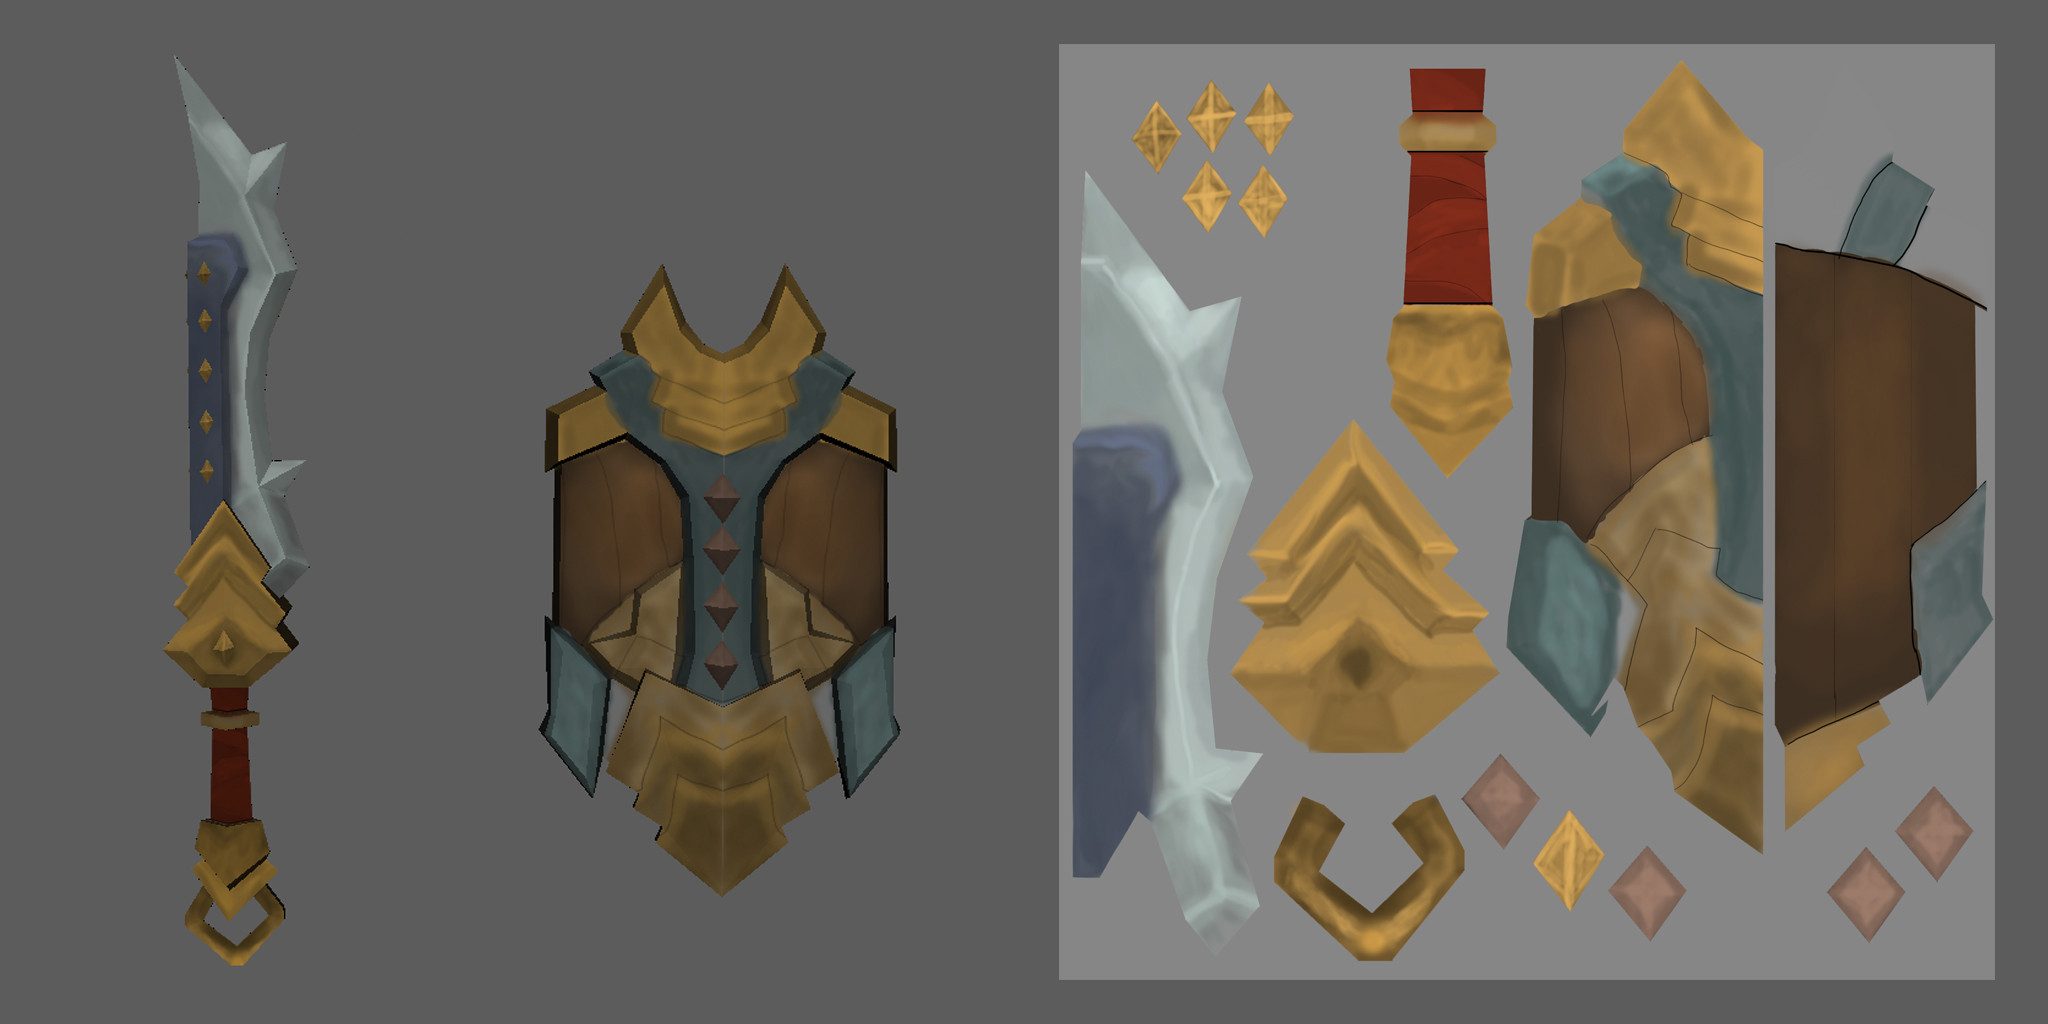 Week 1, stylized hand painted textures.